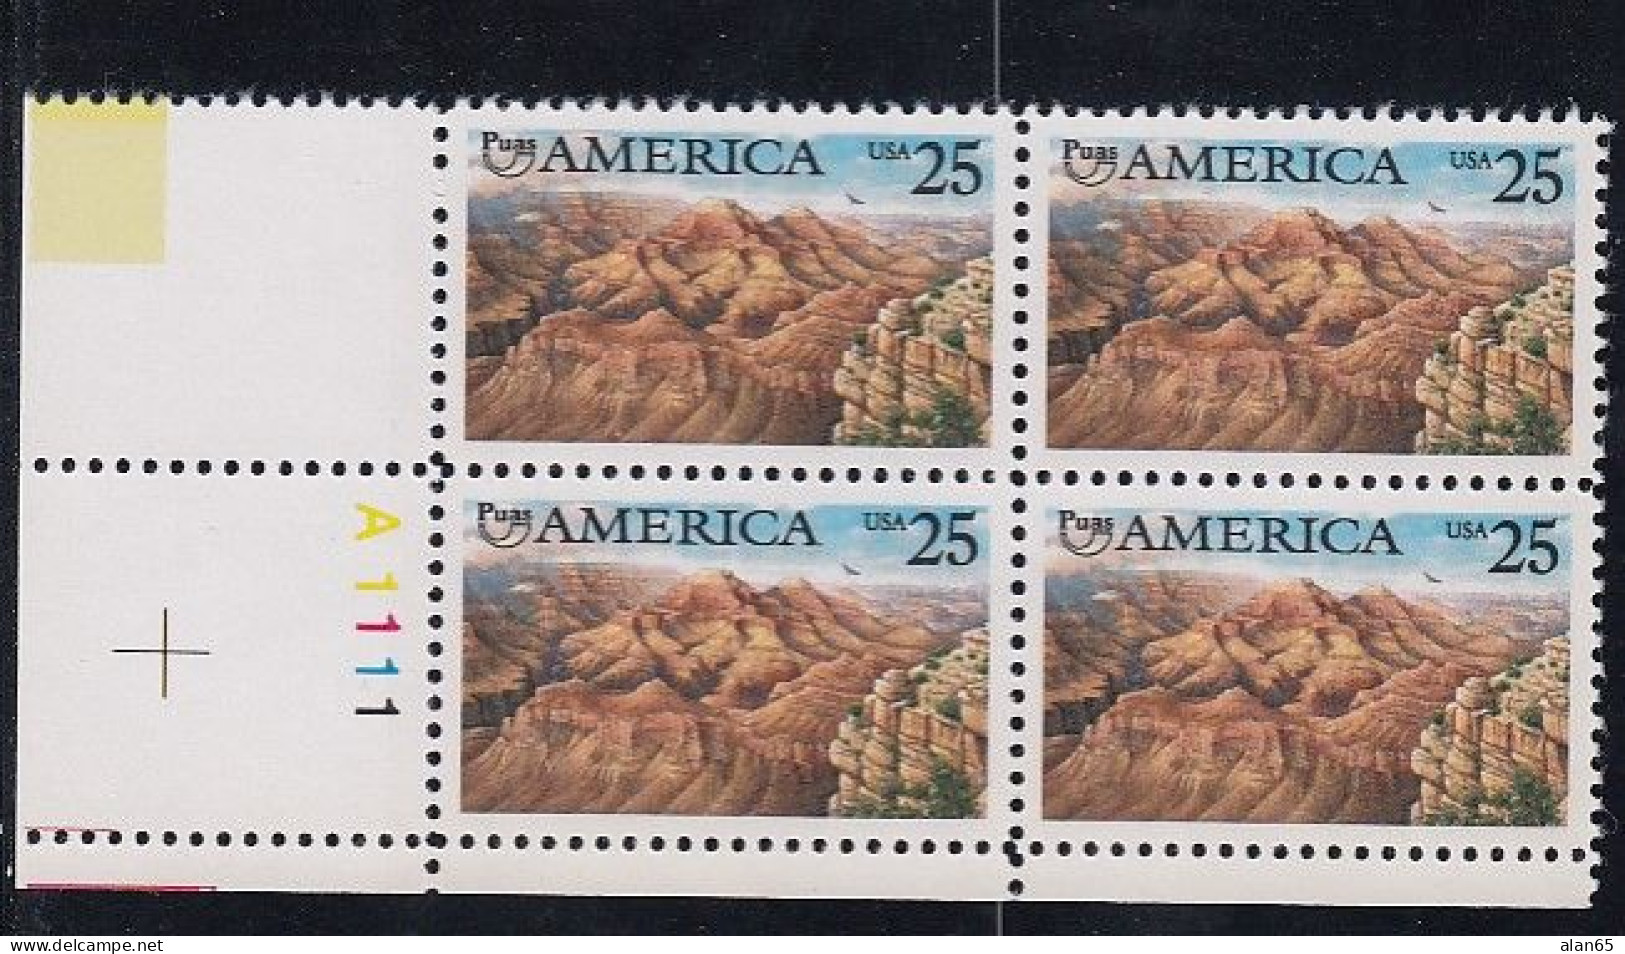 Sc#2512, Pre-Columbian America, Grand Canyon, 25-cent 1990 Issue, Plate # Block Of 4 MNH US Postage Stamps - Plaatnummers